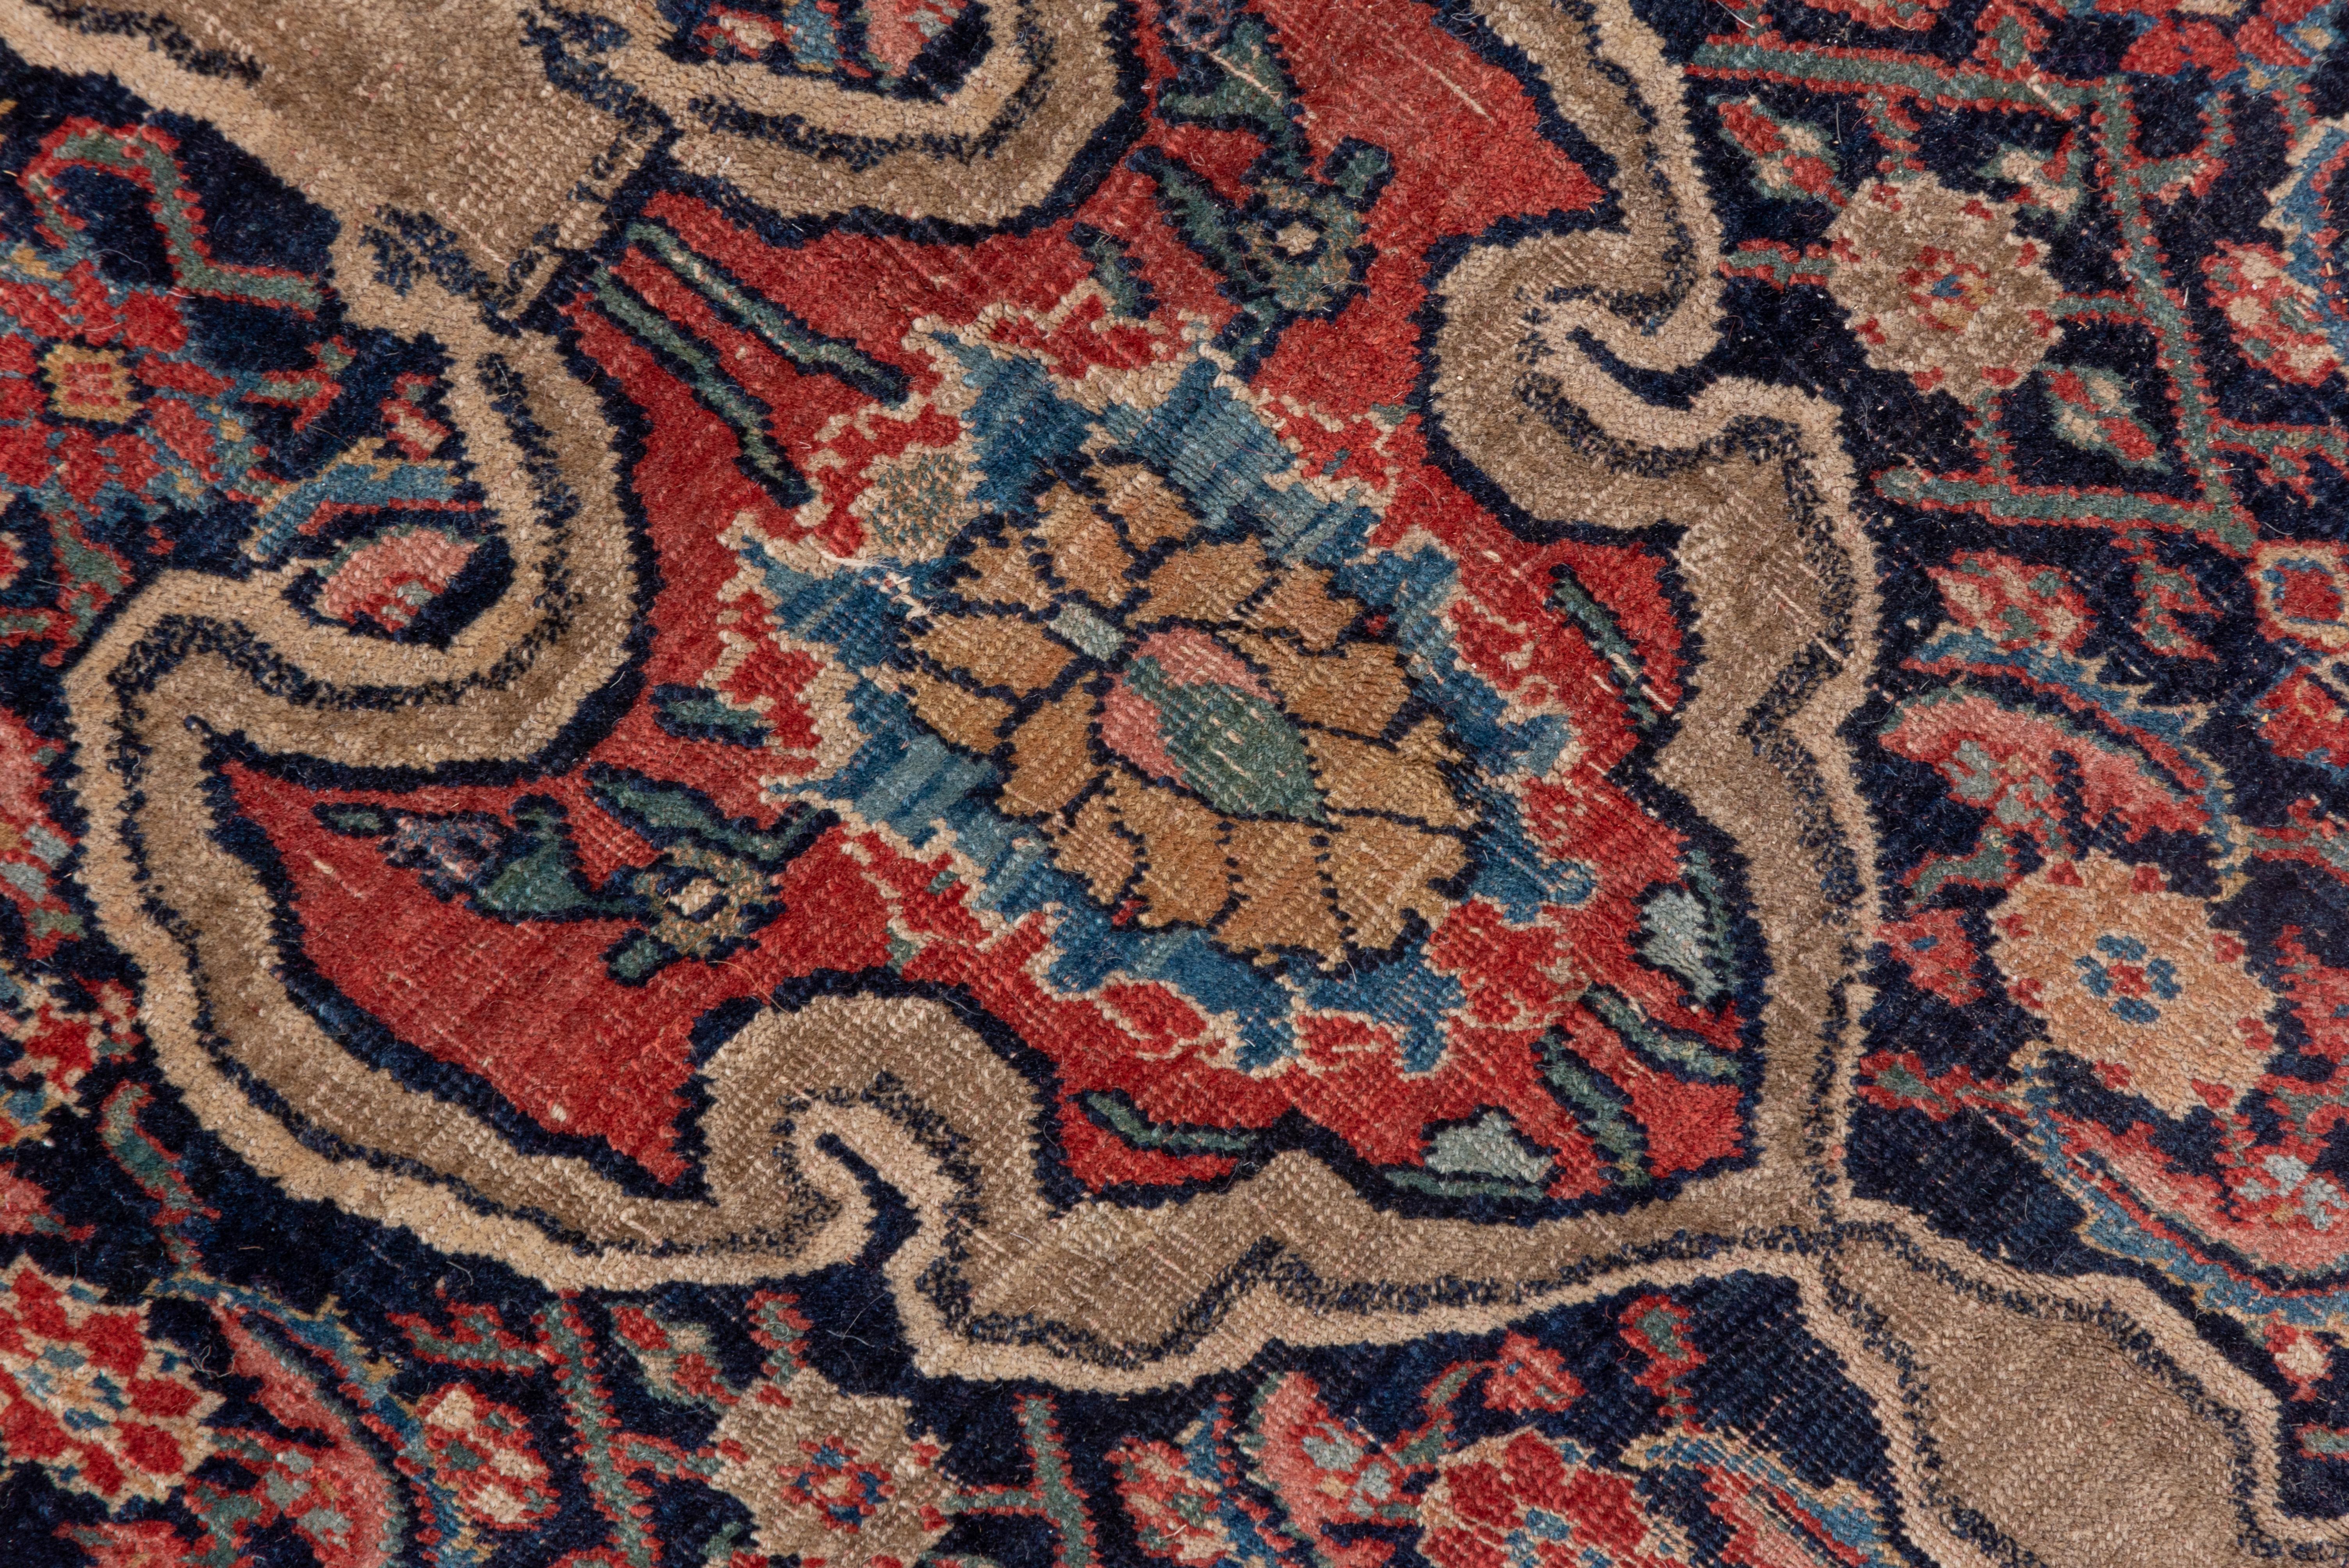 Late 19th Century Fine Antique Bidjar Carpet with Incredible Colors and Details, Unusual Border For Sale